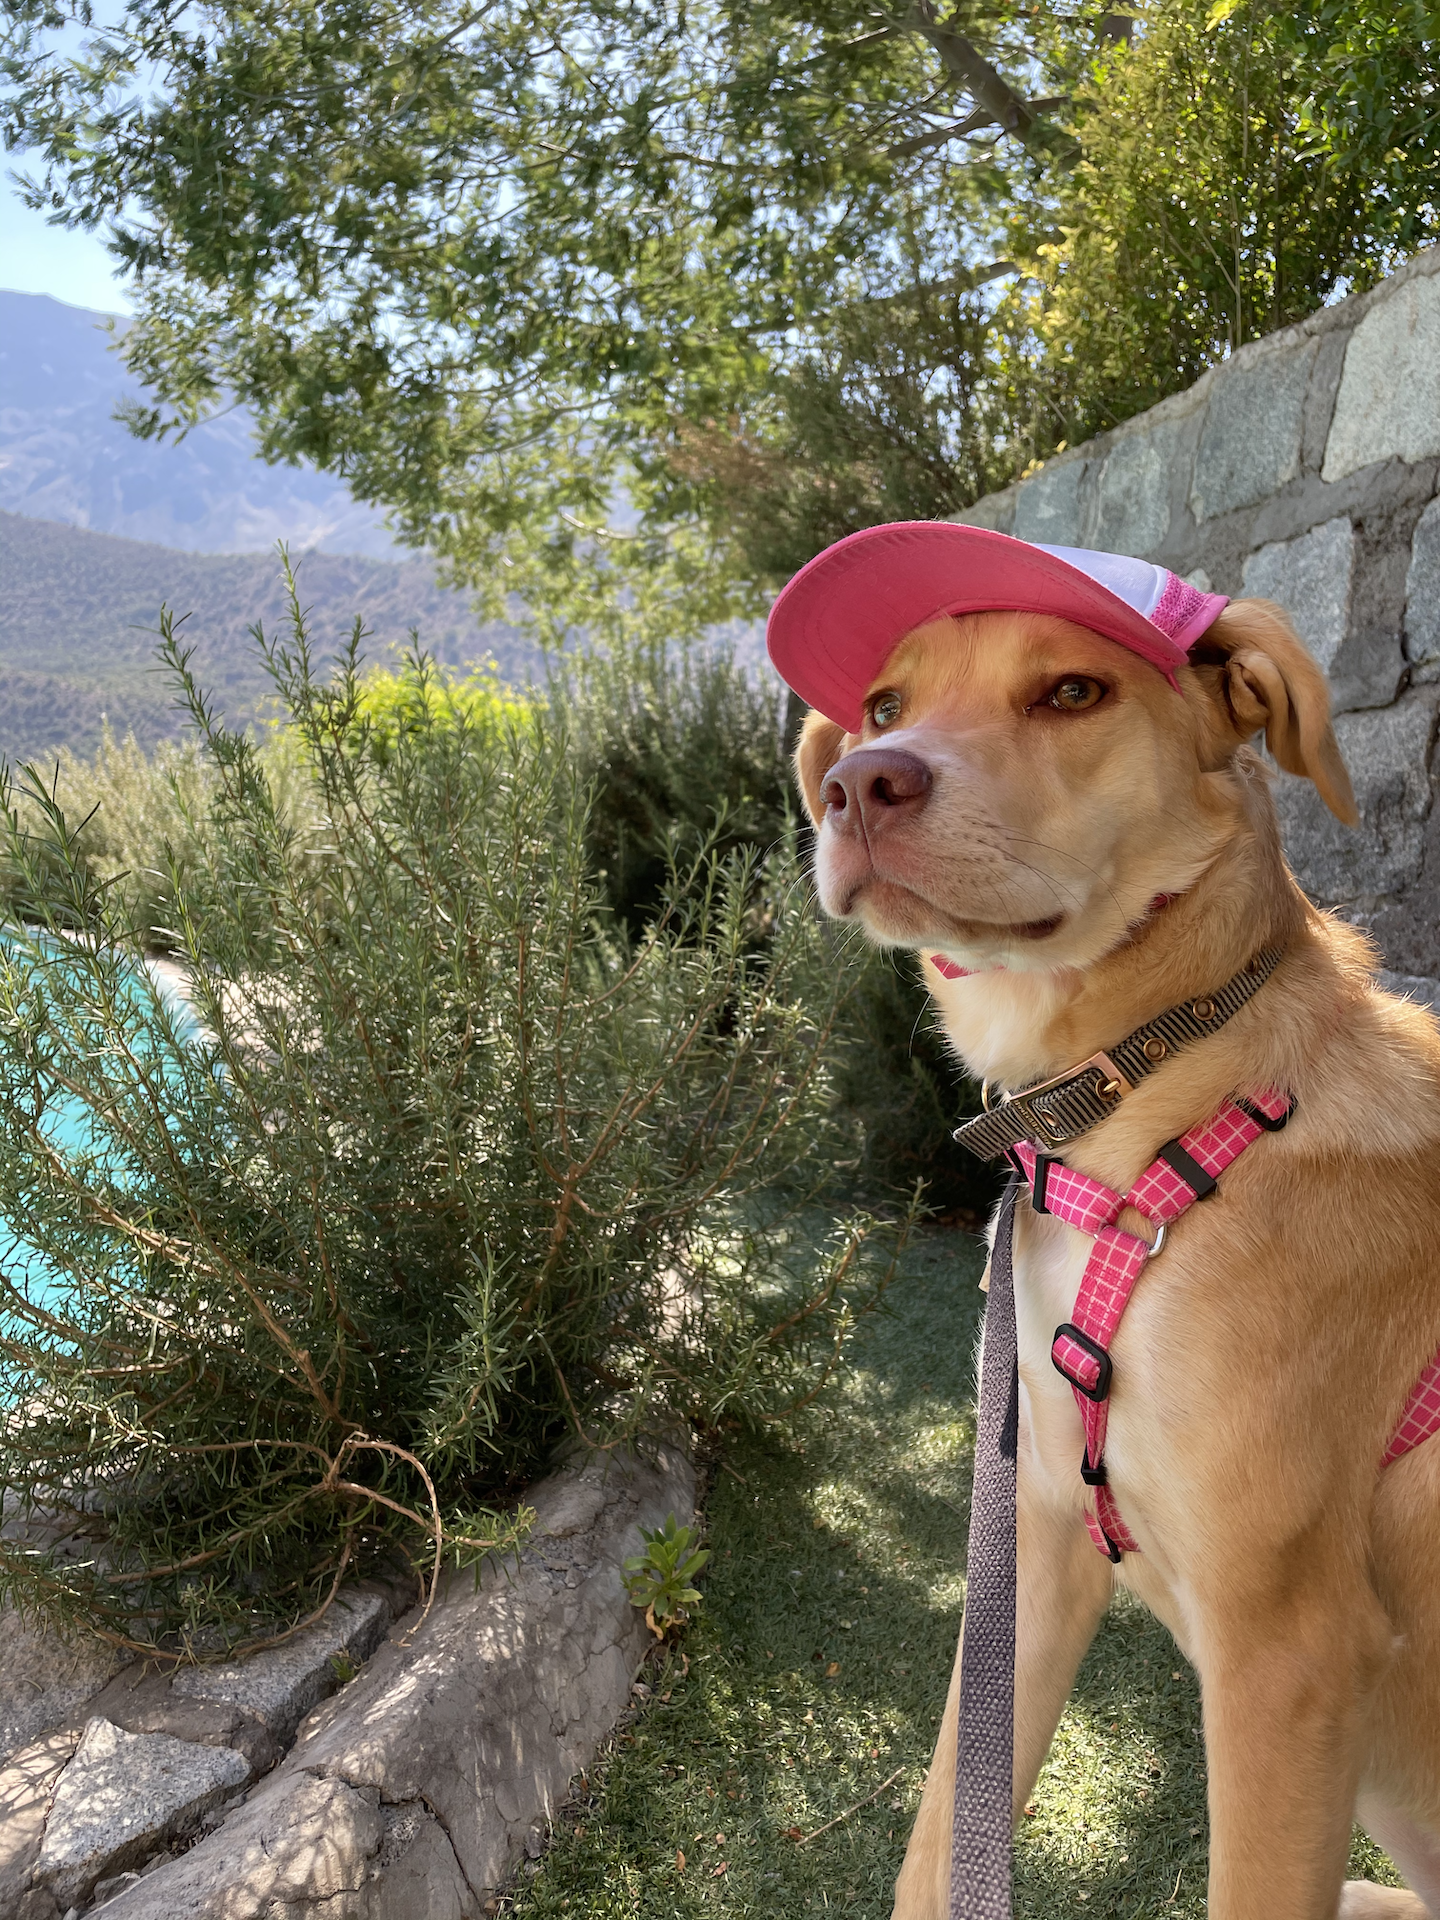 Merlot is a lab mix relaxing in the shade wearing a Small pink puplid dog hat 